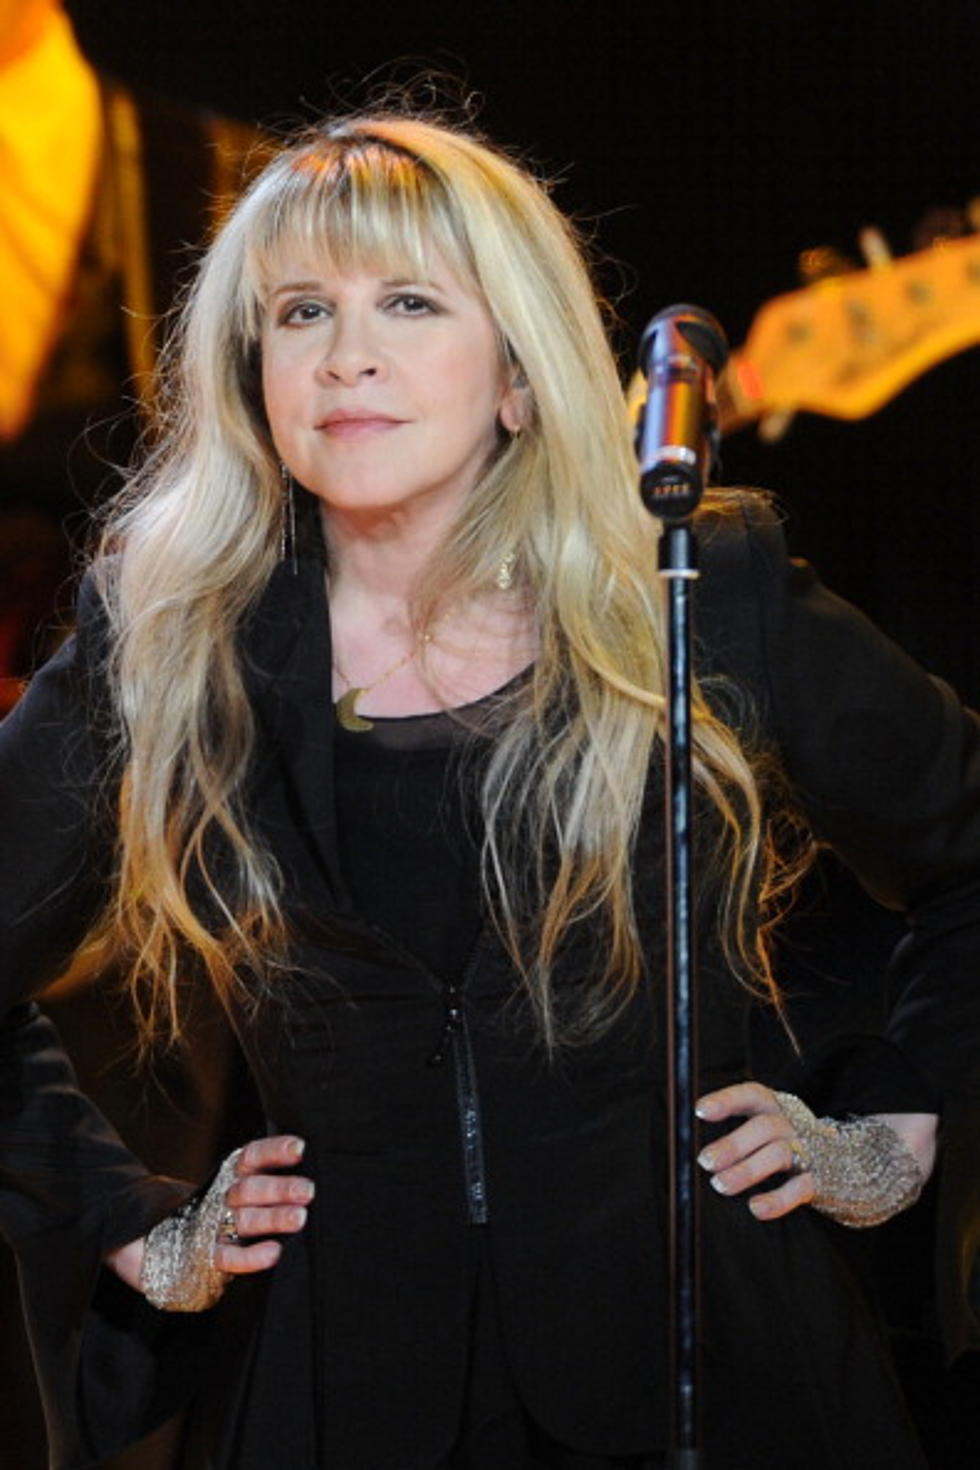 Stevie Nicks Releases New CD But Cancels Performances